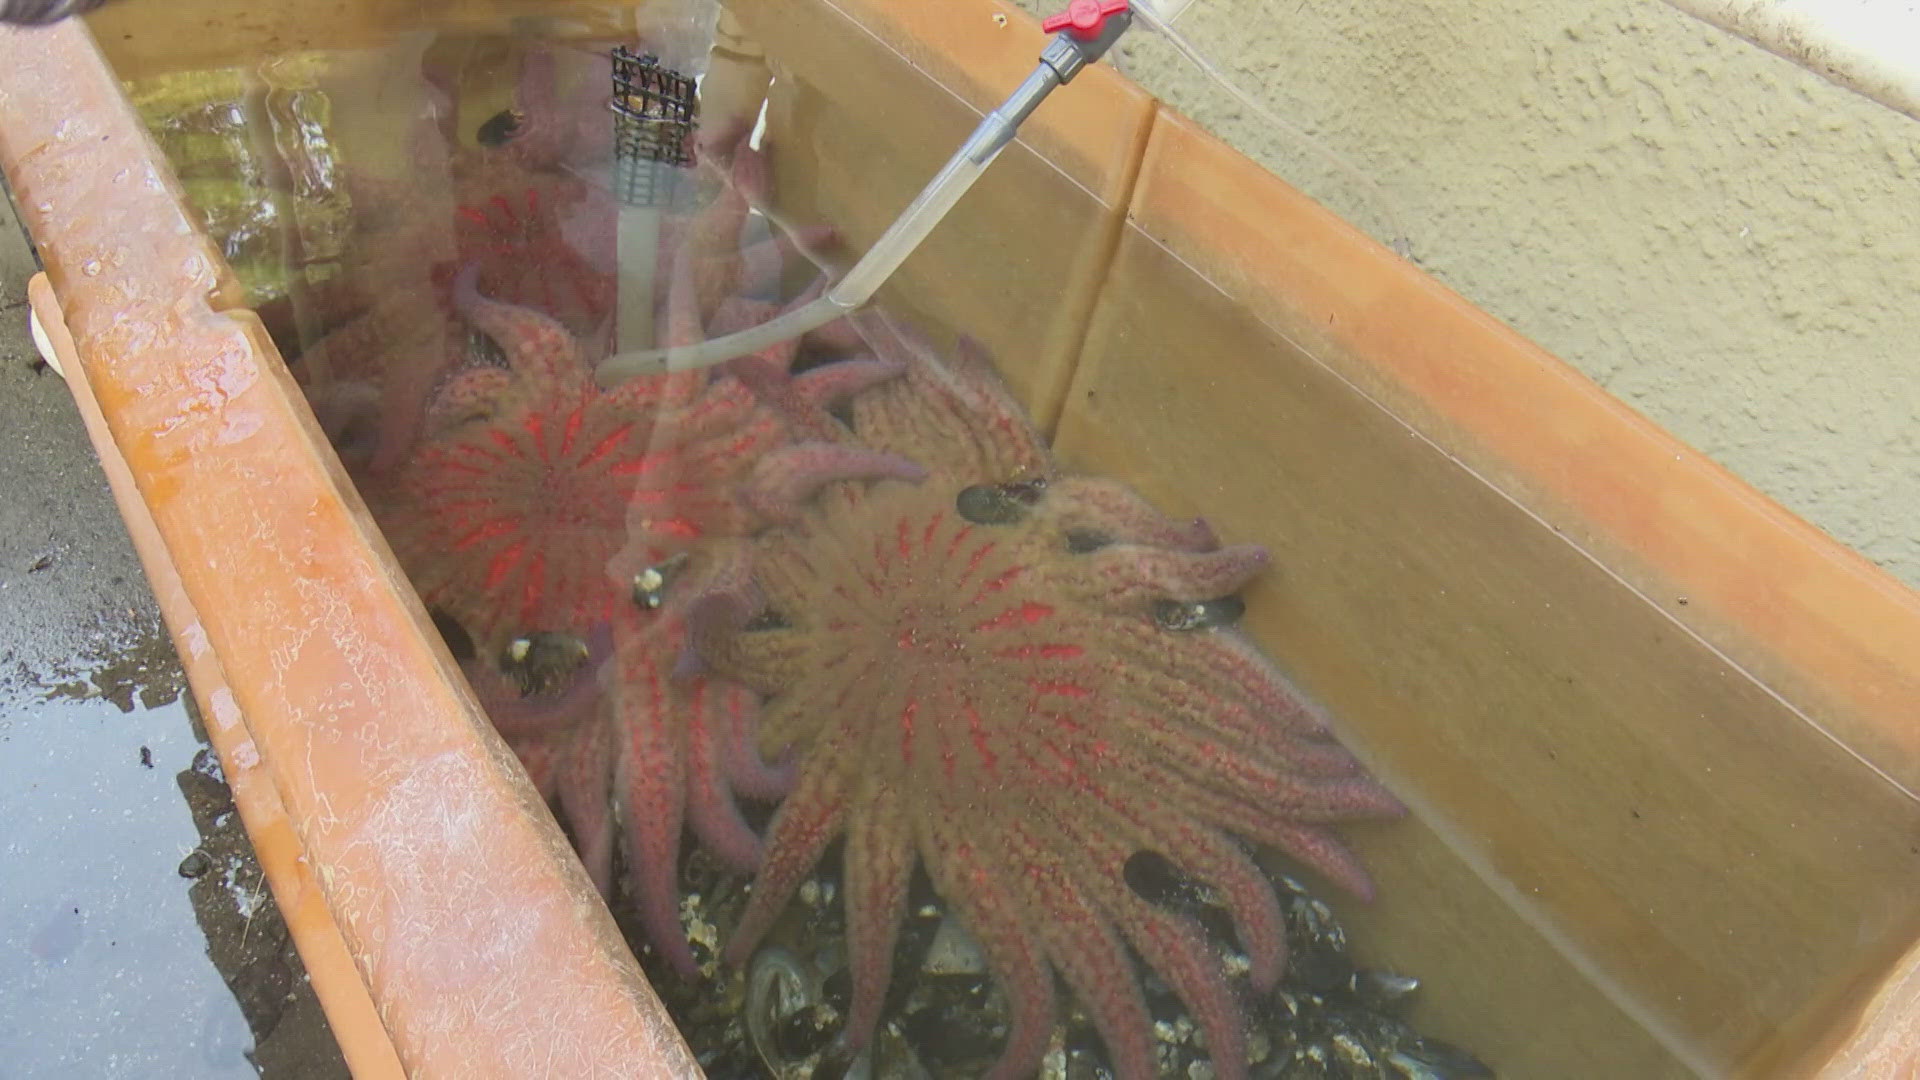 Disease nearly wiped out sunflower sea stars about 10 years ago, and University of Washington scientists are using the lingering population to save the species.